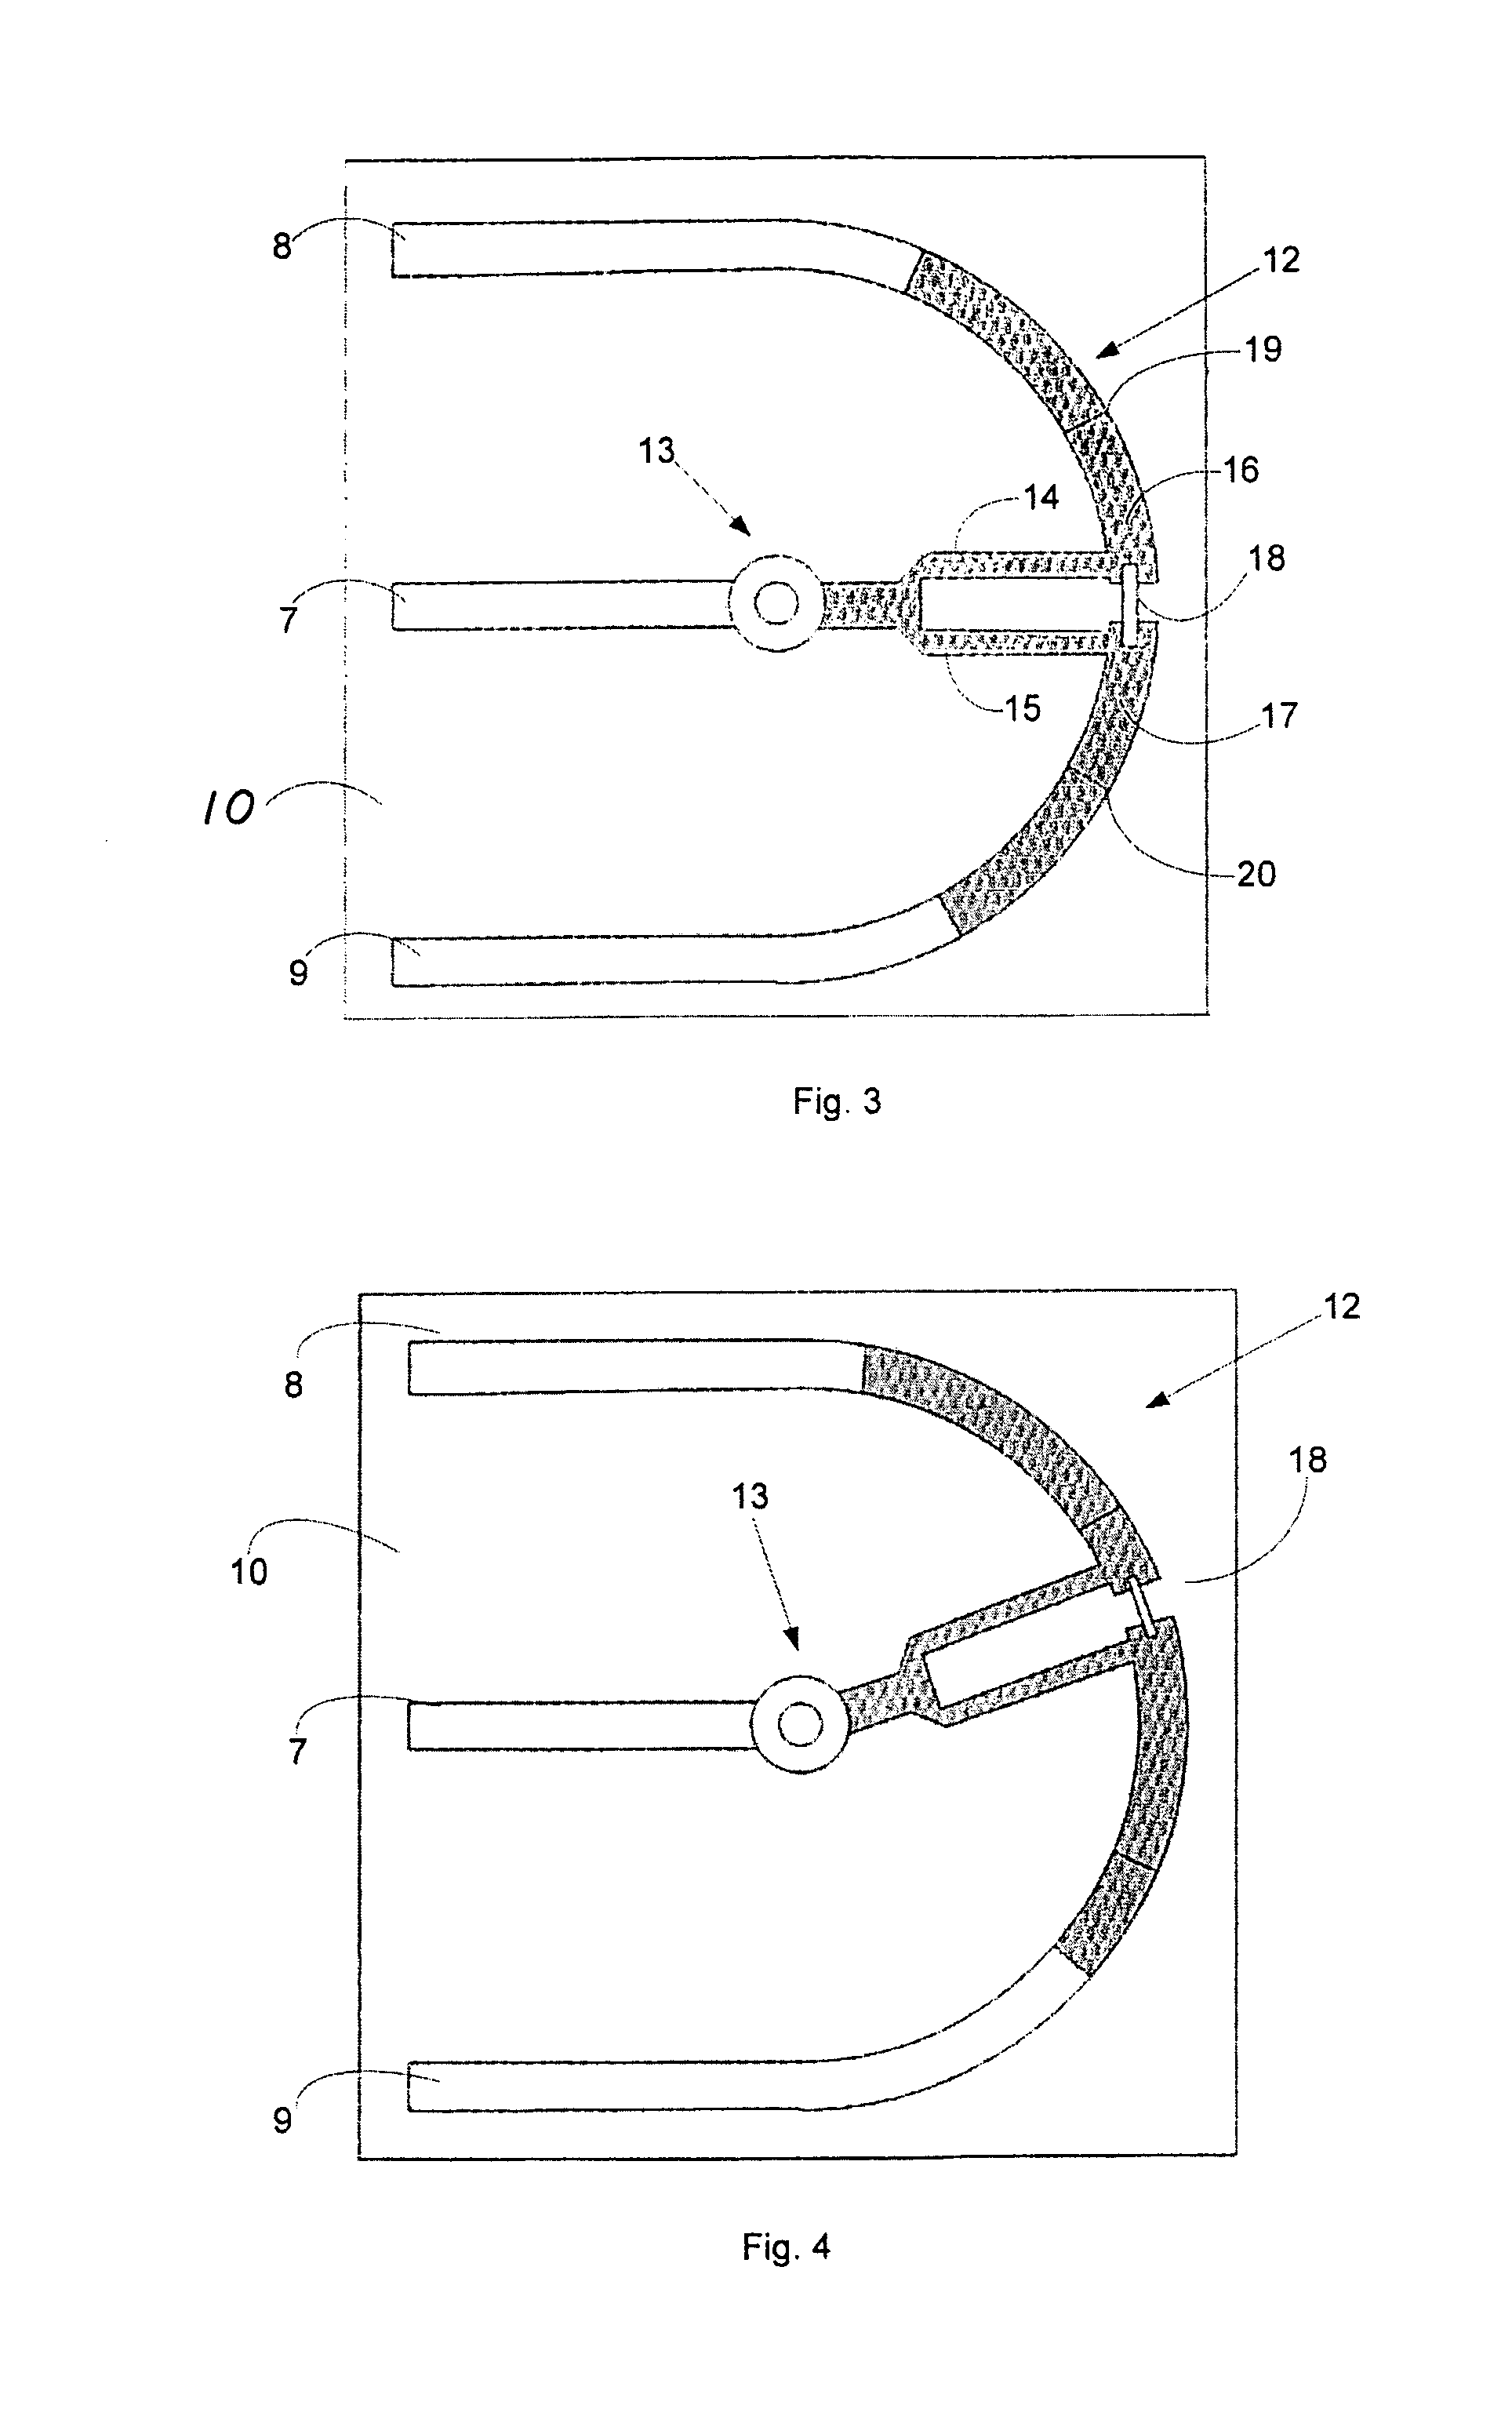 Variable differential phase shifter having a divider wiper arm